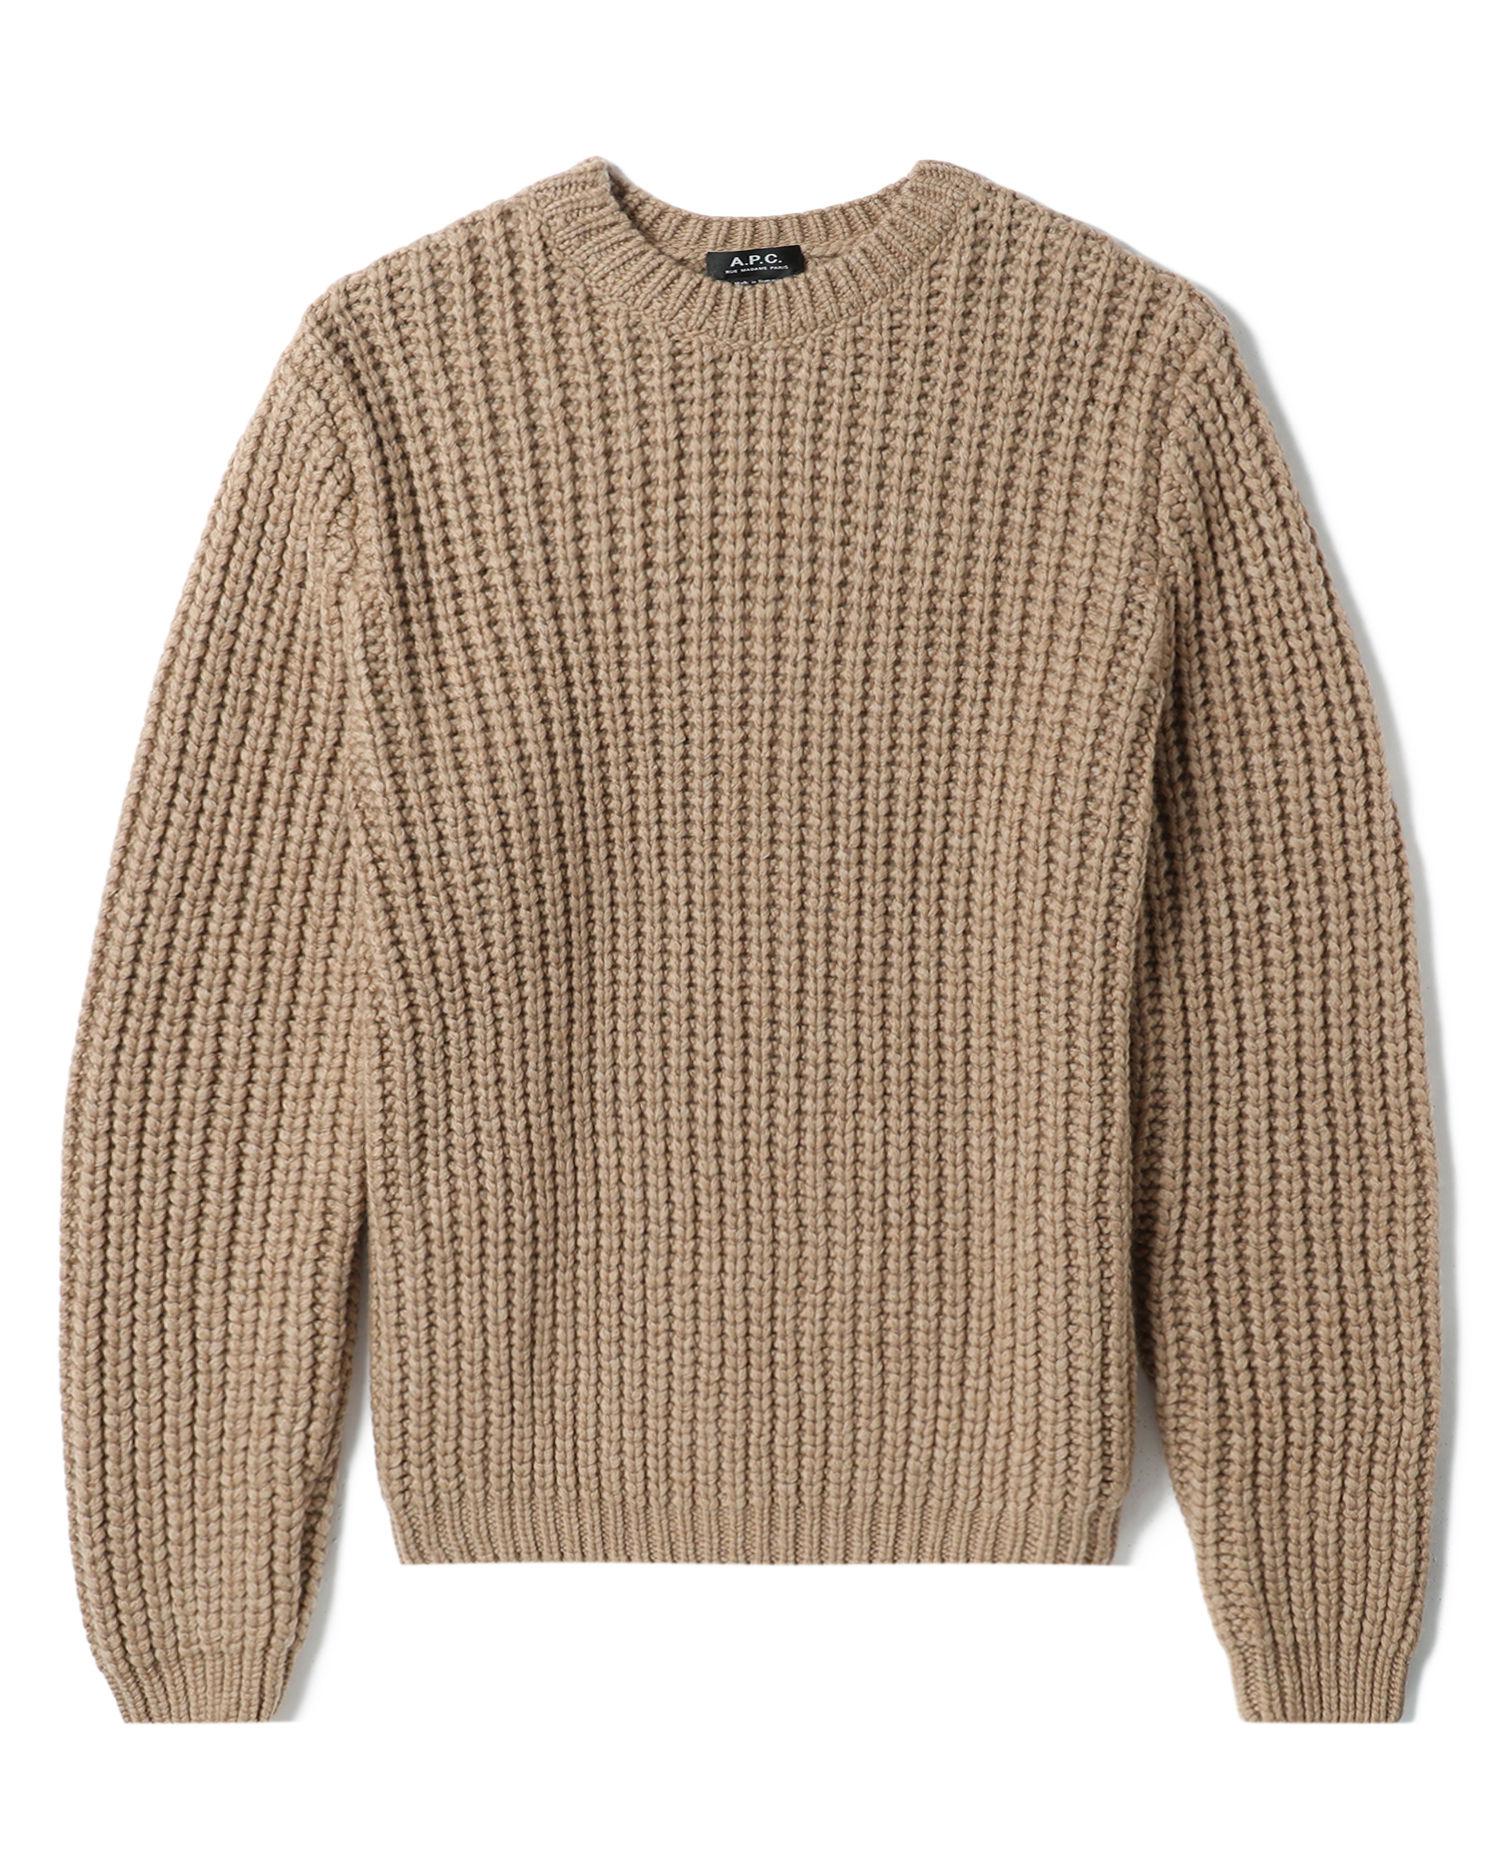 Heini sweater by A.P.C.